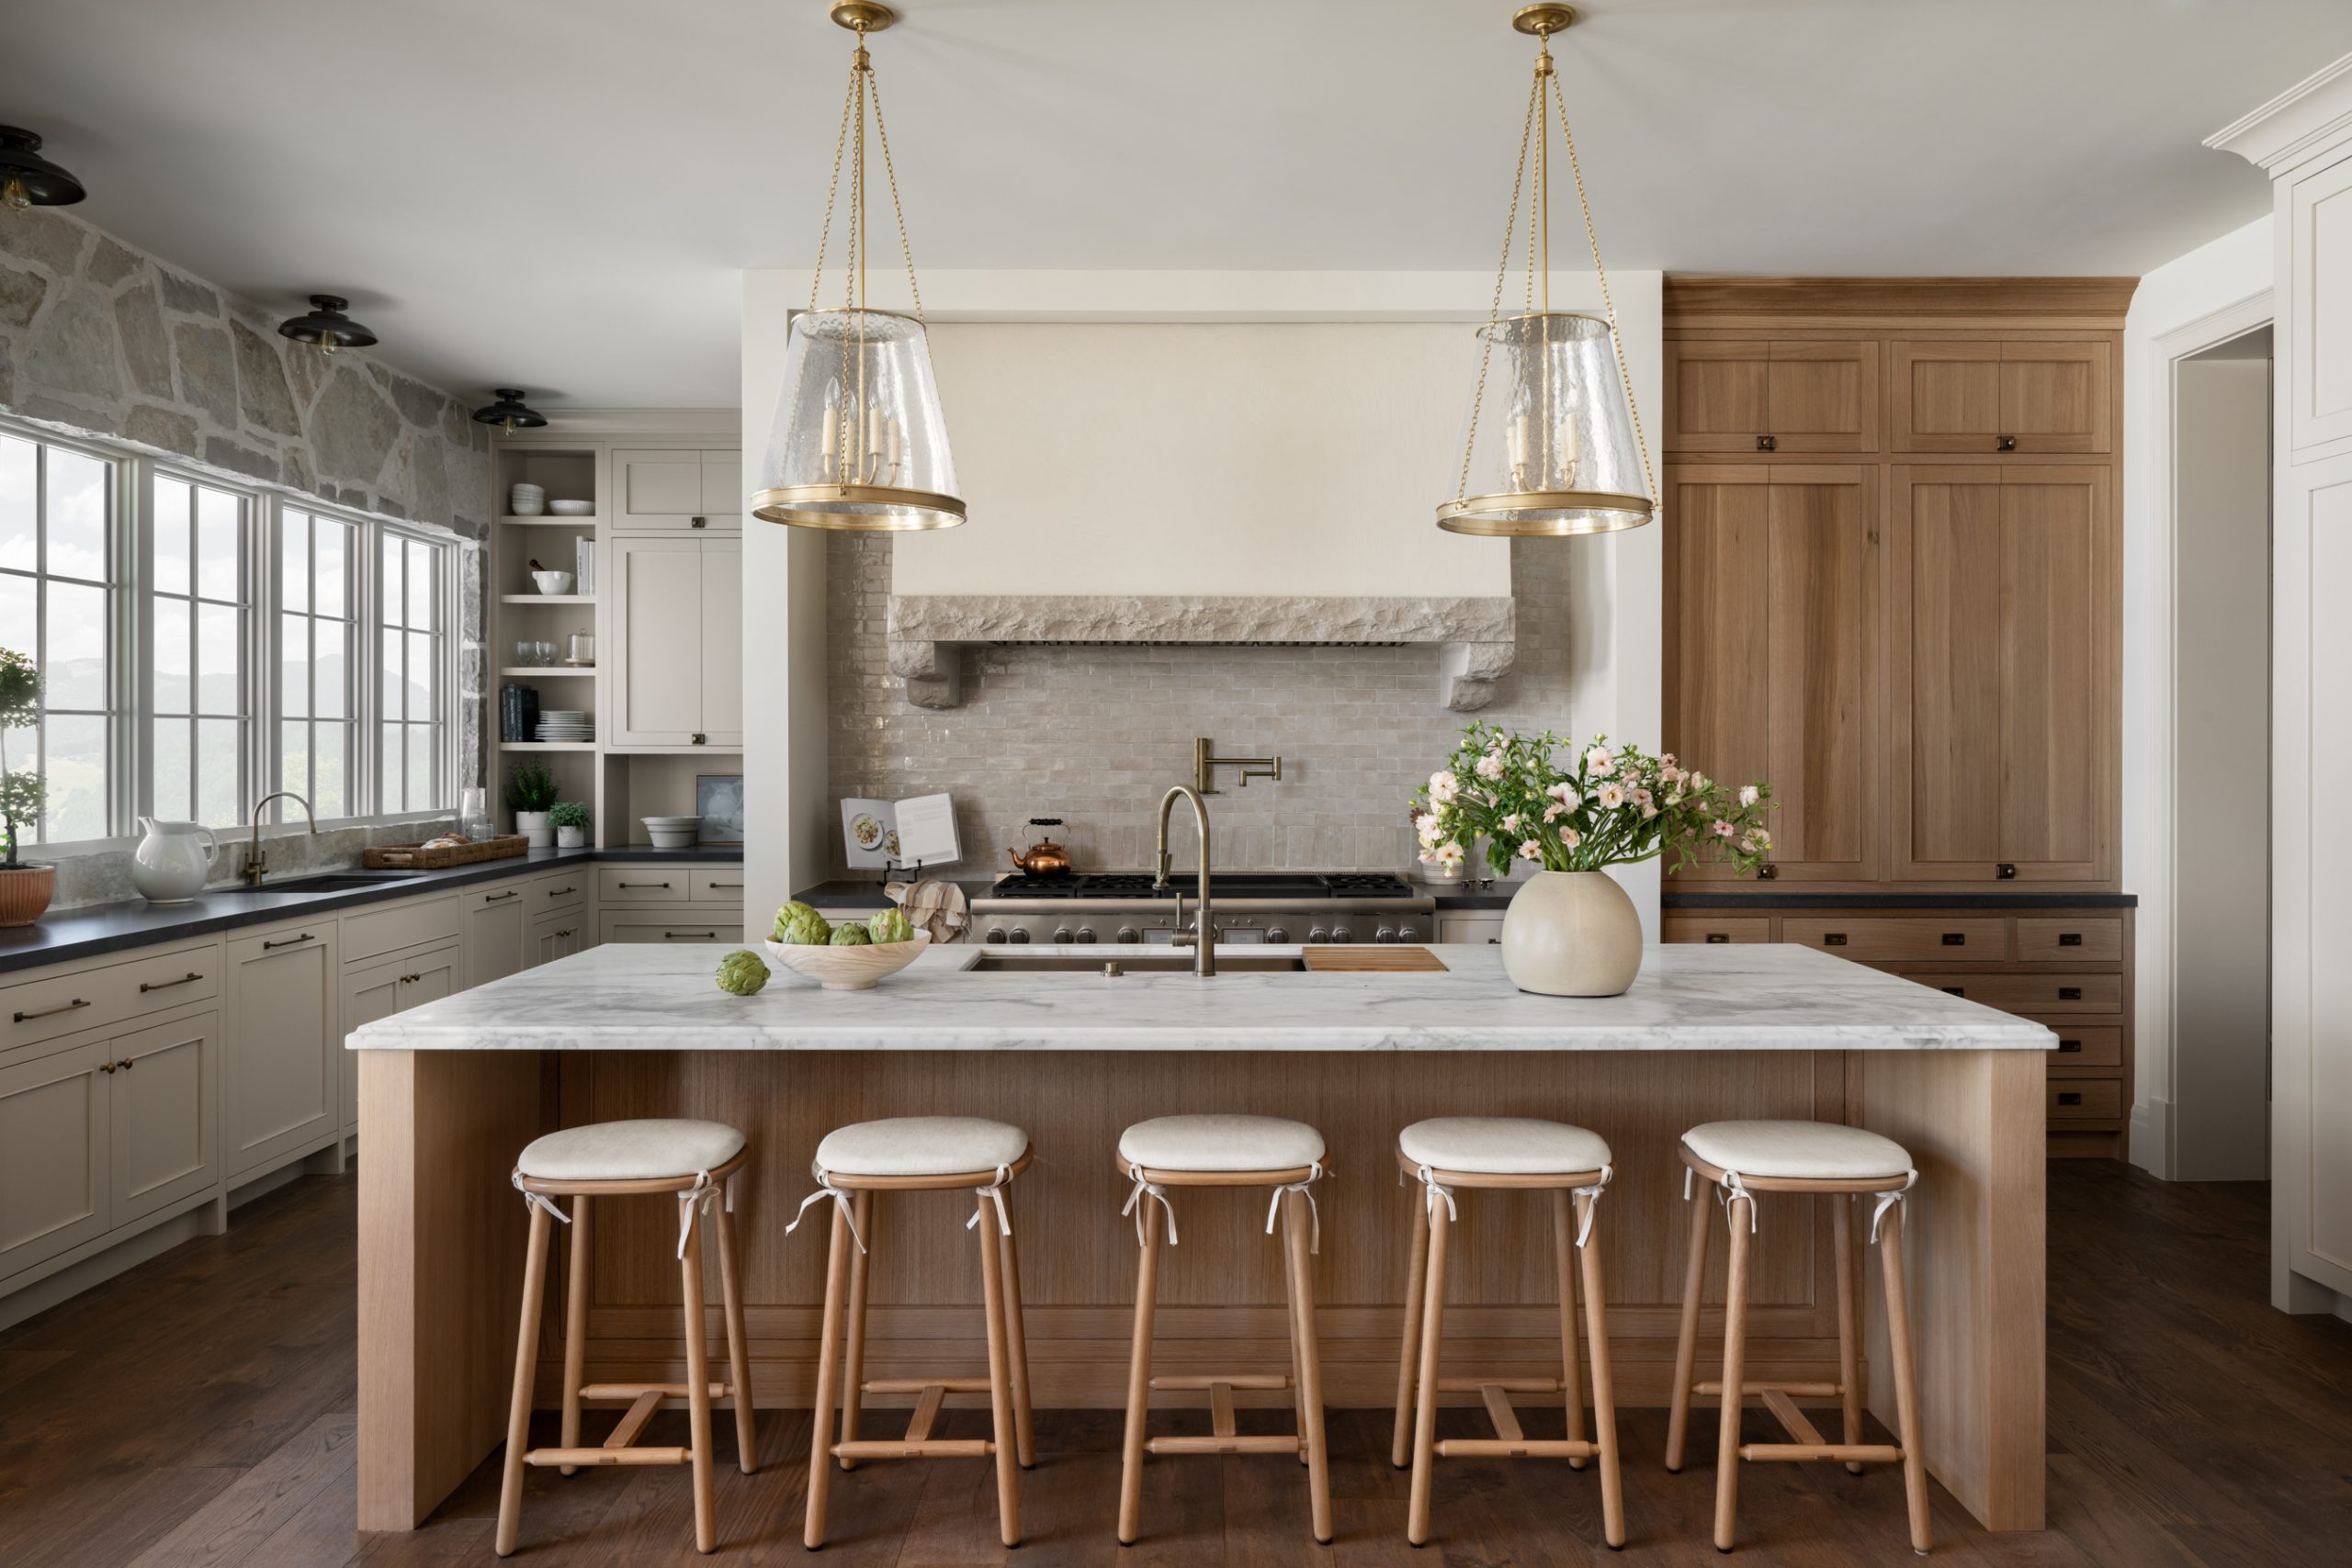 kitchen with natural wood island and marble countertops with wooden stools and glass pendants